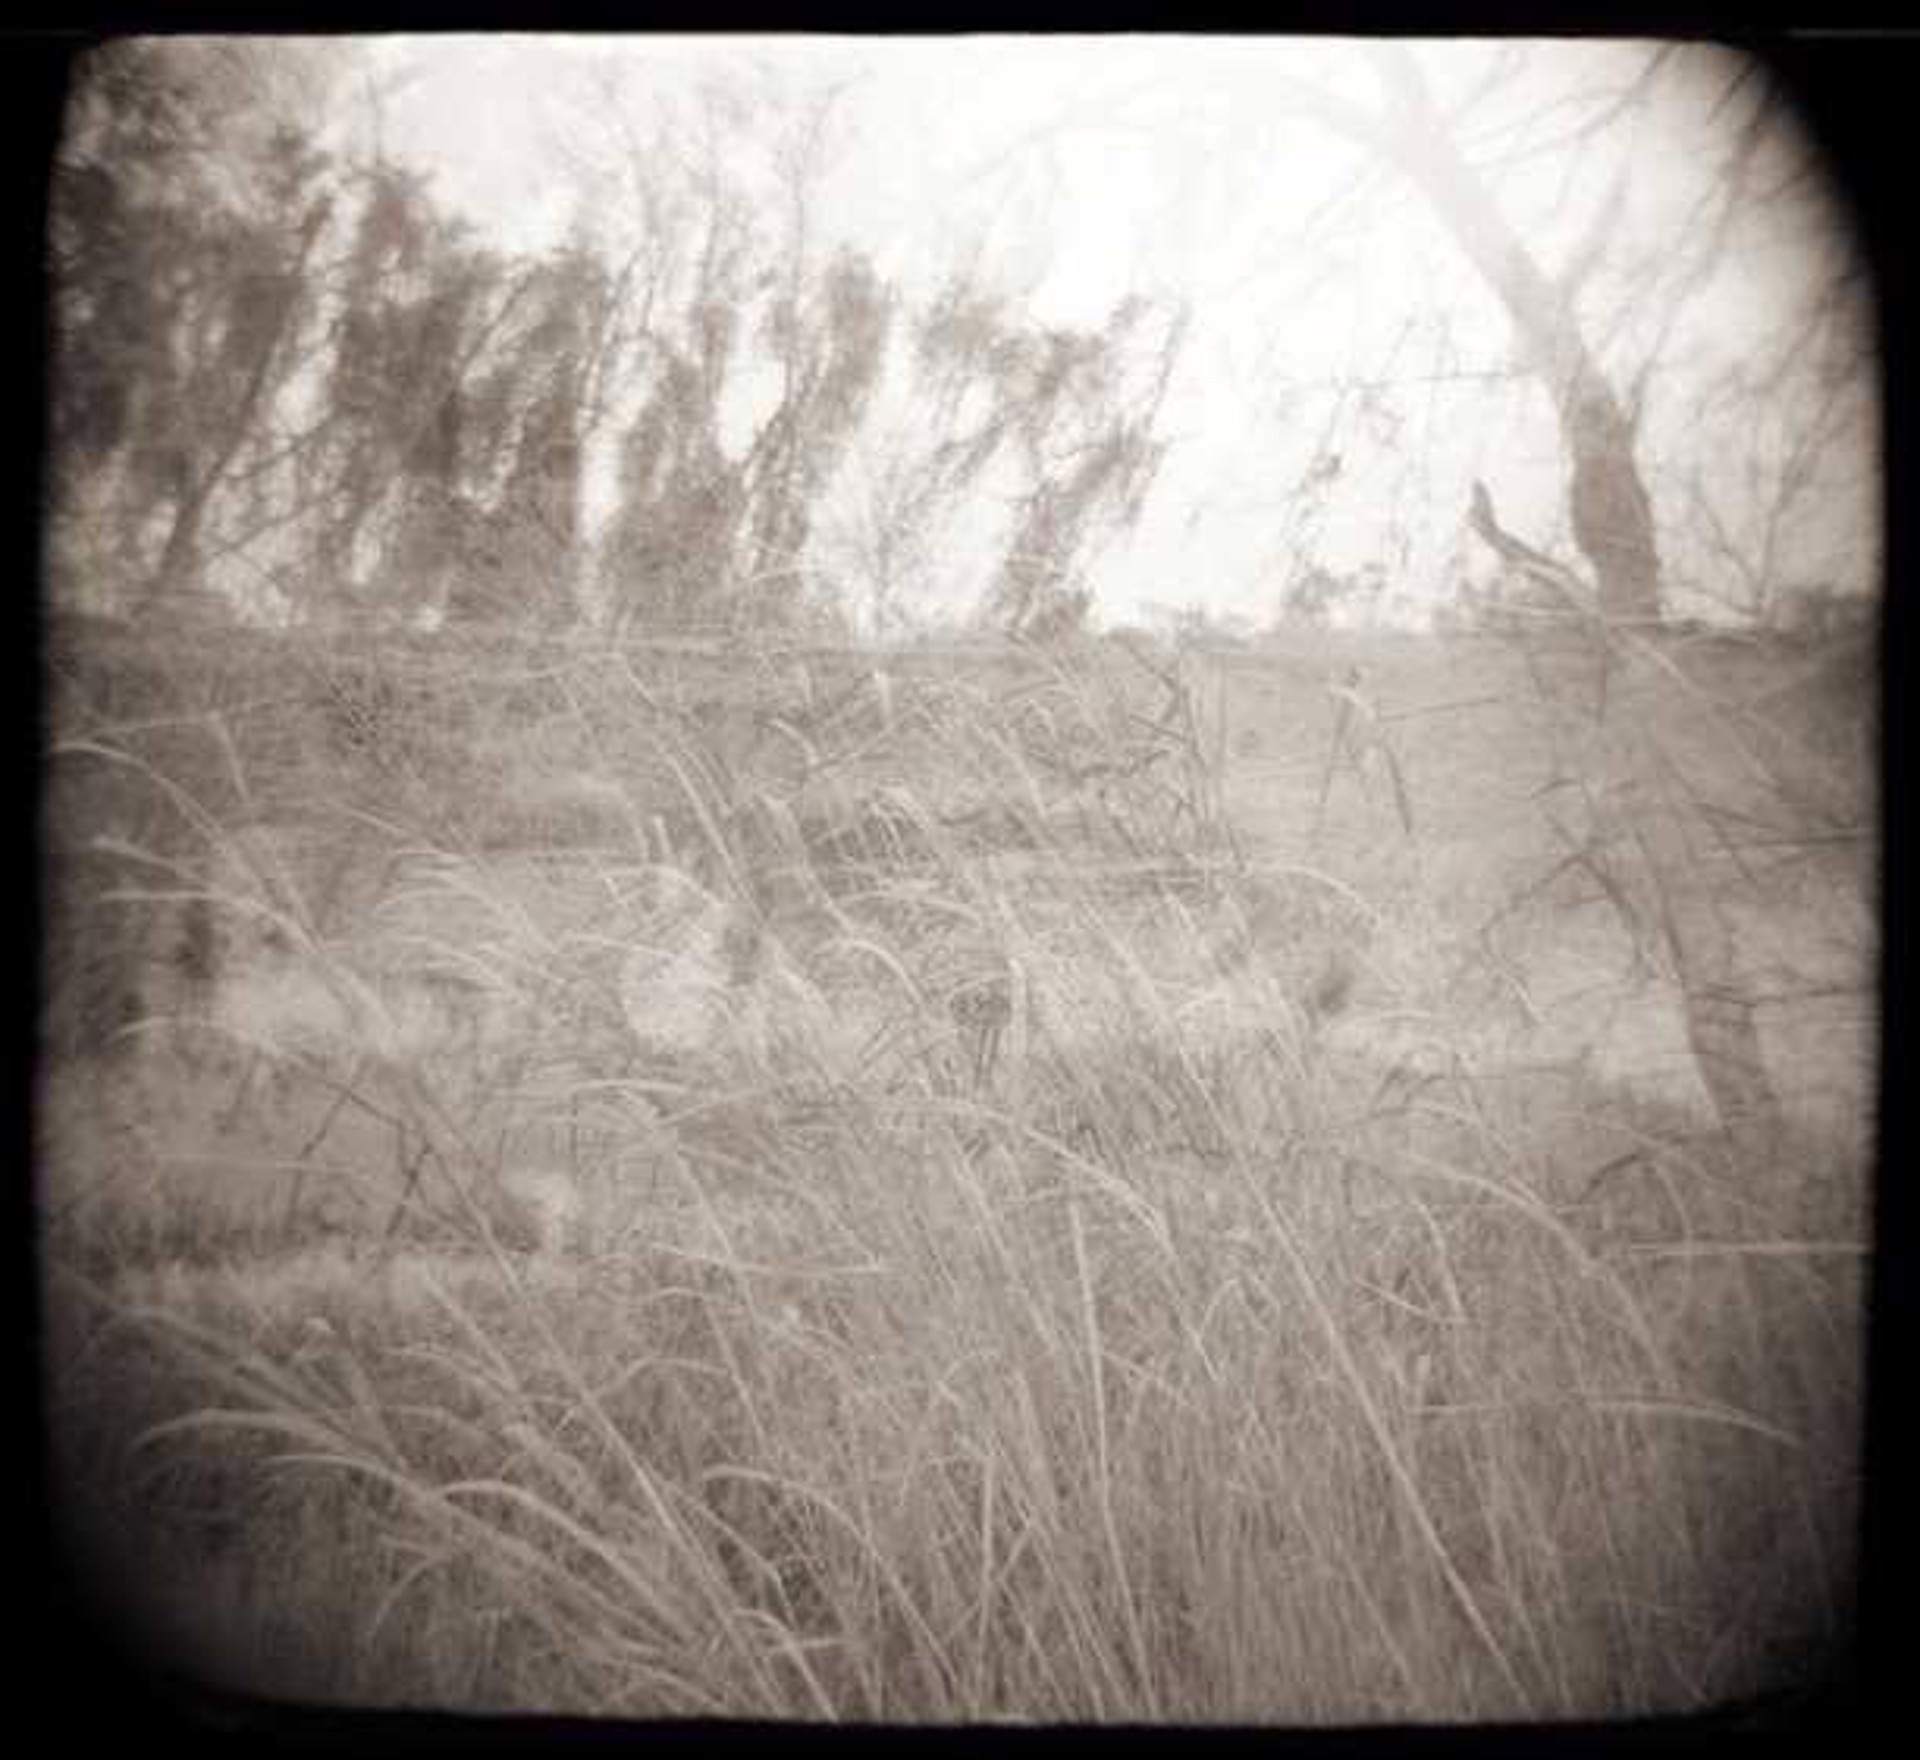 Swamp & Grasses, Bayou Sauvage by Leslie Addison